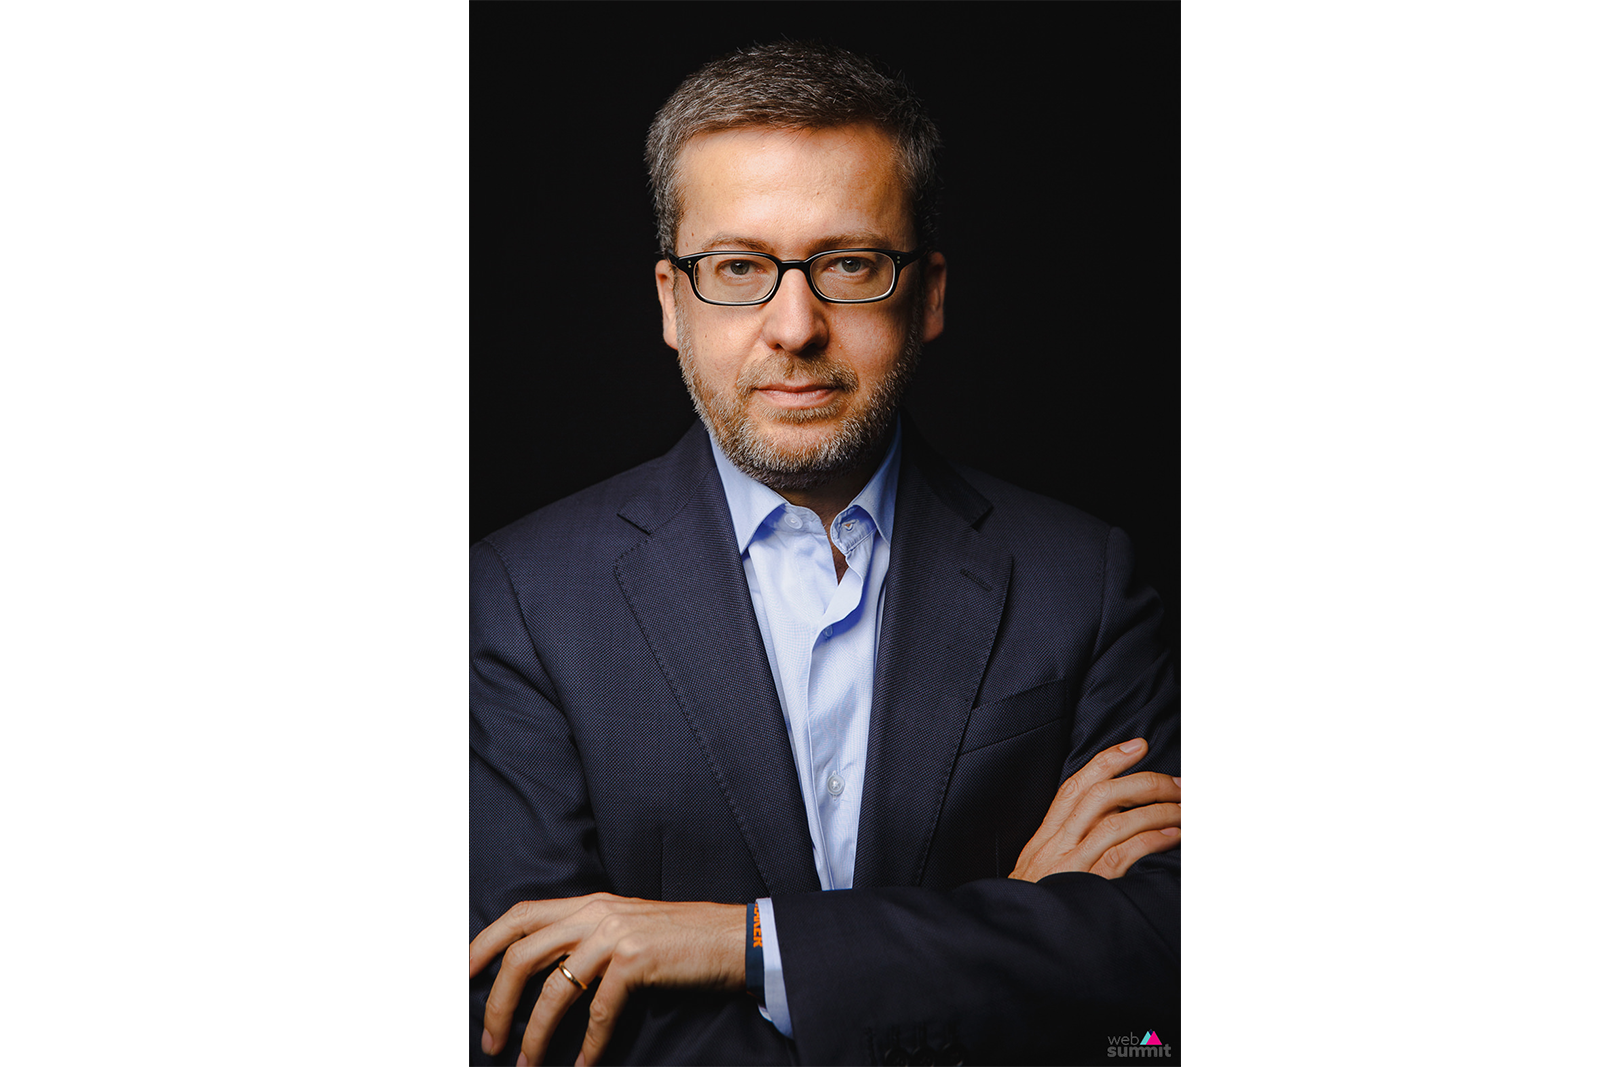 Carlos Moedas, E.U. Commissioner for Research, Science and Innovation (2015-2019)